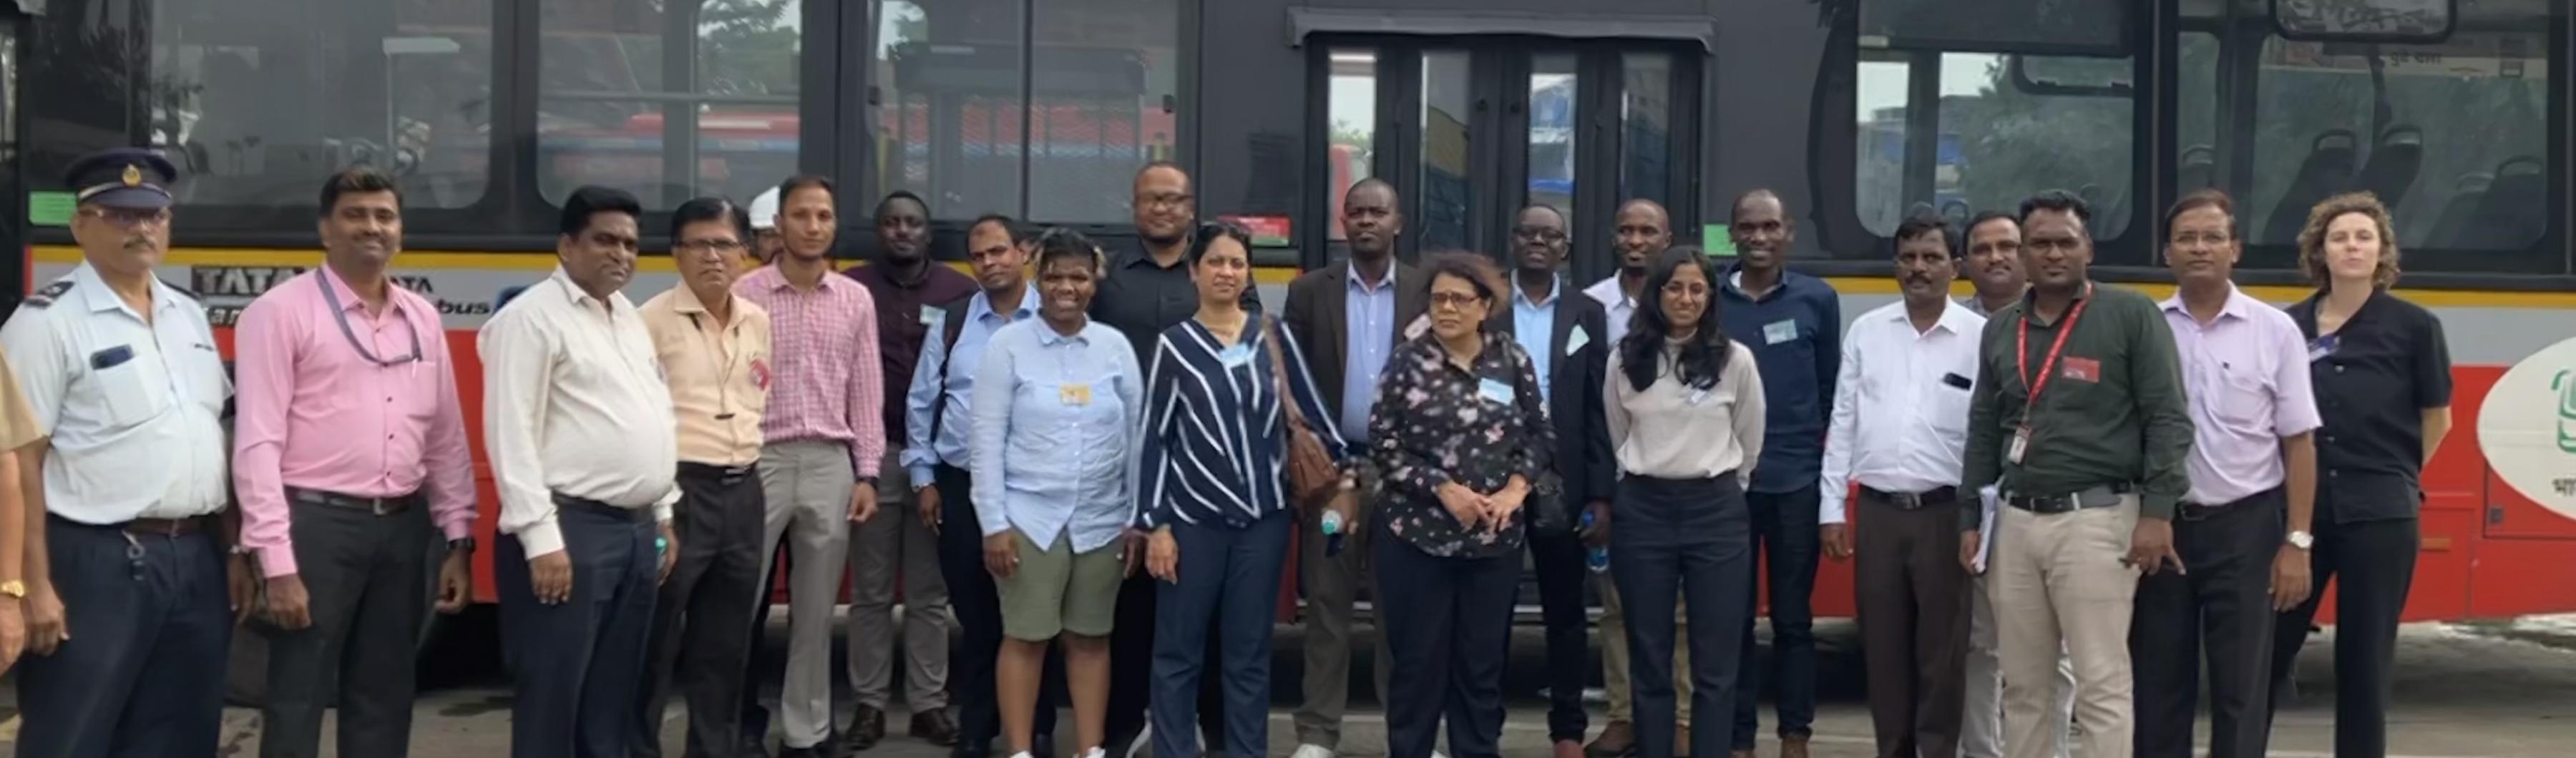 The UrbanShift Peer to Peer exchange participants in front of a zero-emission bus in Mumbai